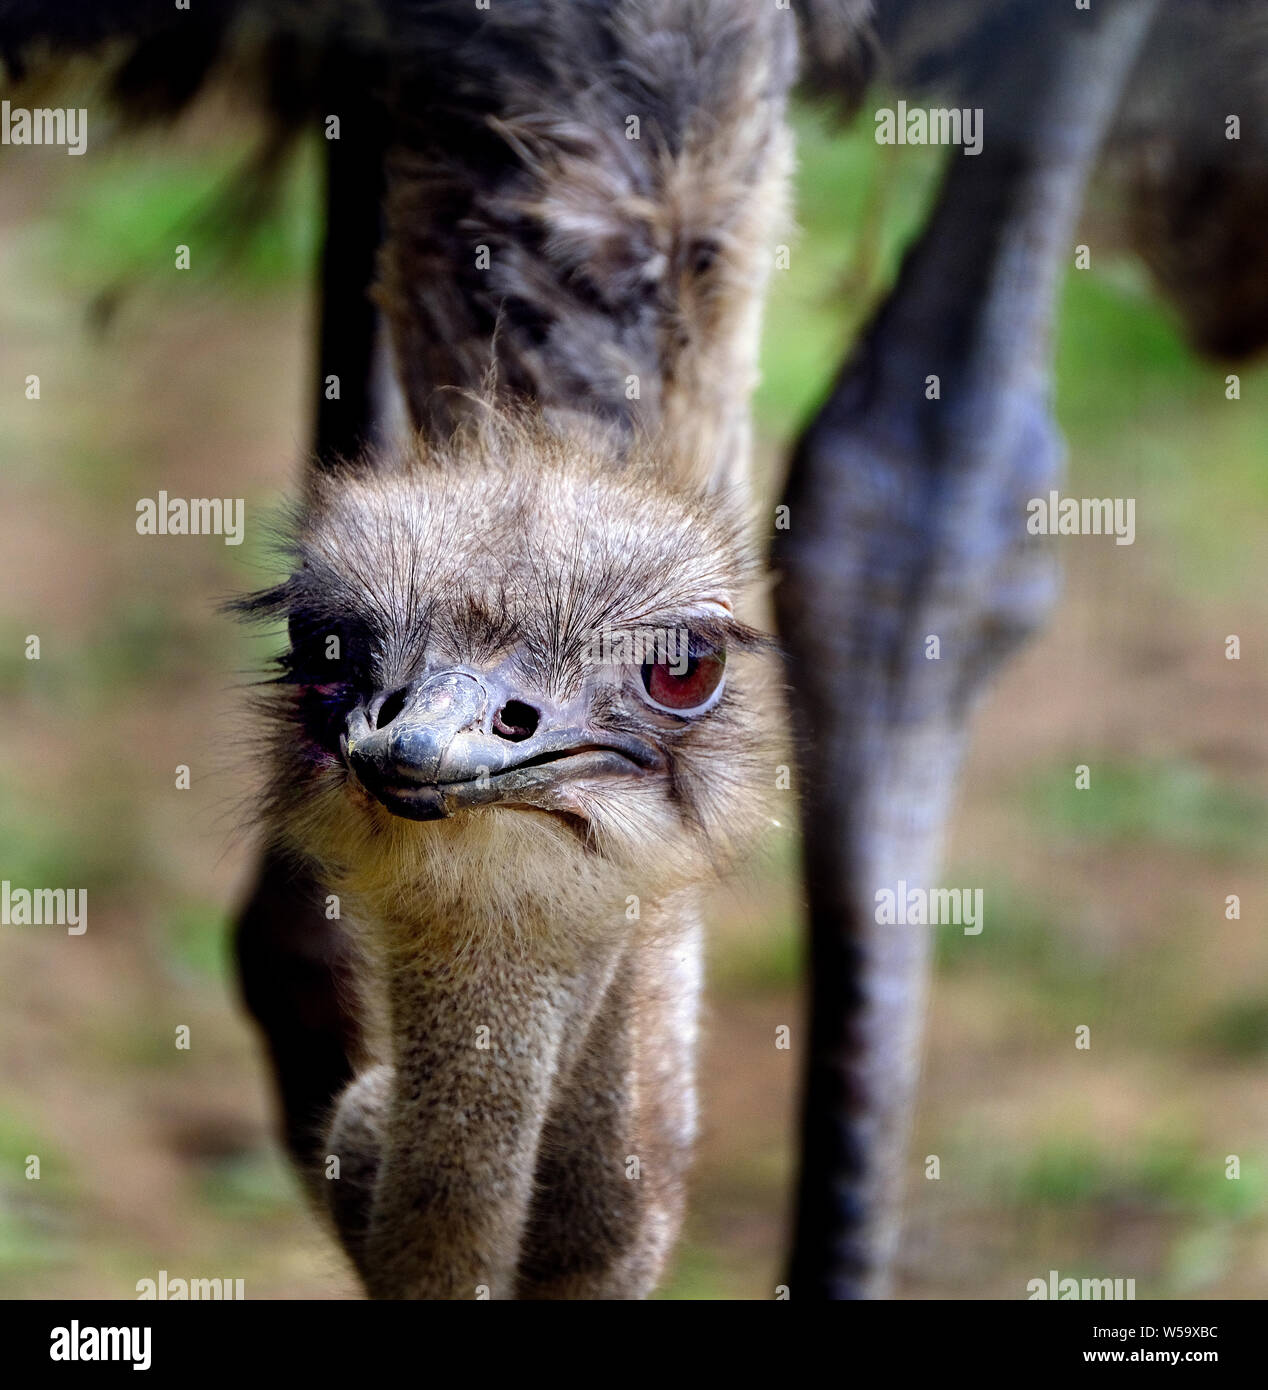 The ostriches are a family, Struthionidae, of flightless birds. Stock Photo